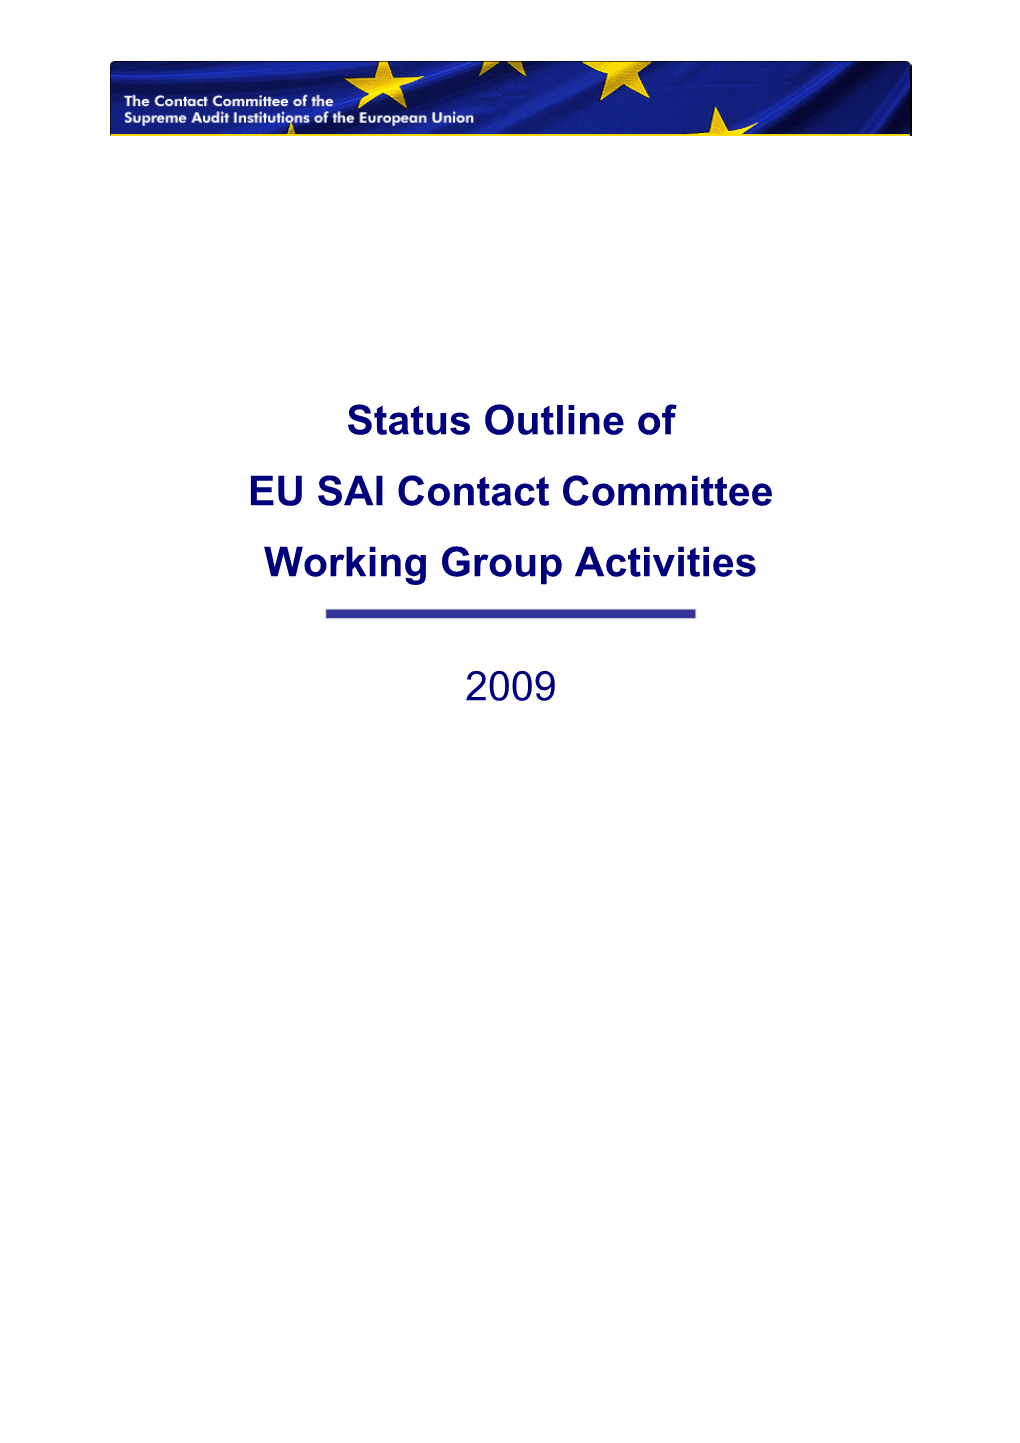 Status Outline of EU SAI Contact Committee Working Group Activities